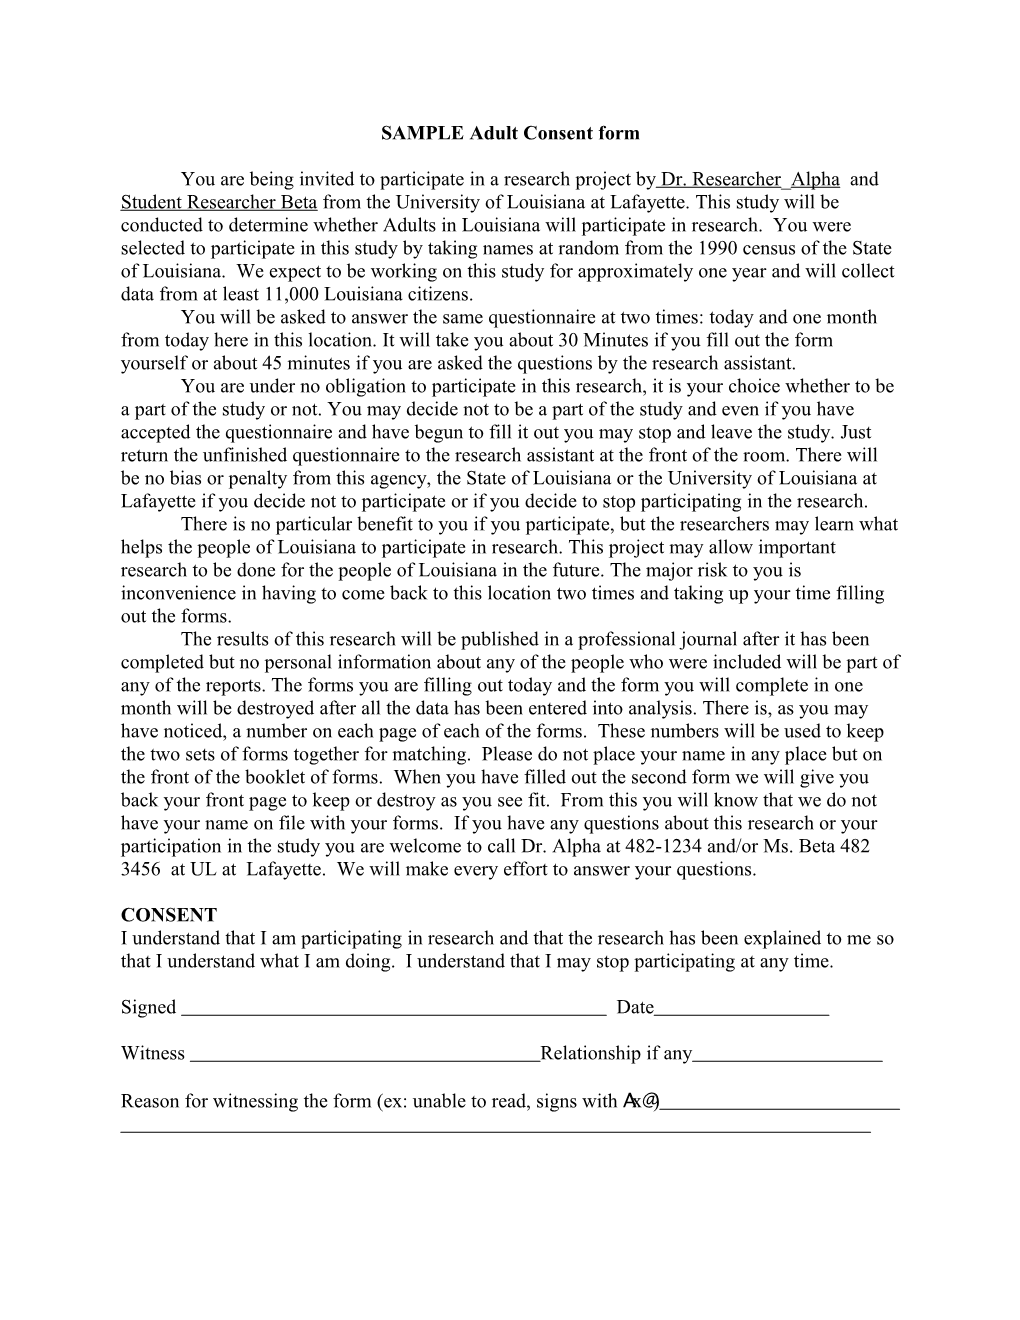 SAMPLE Adult Consent Form